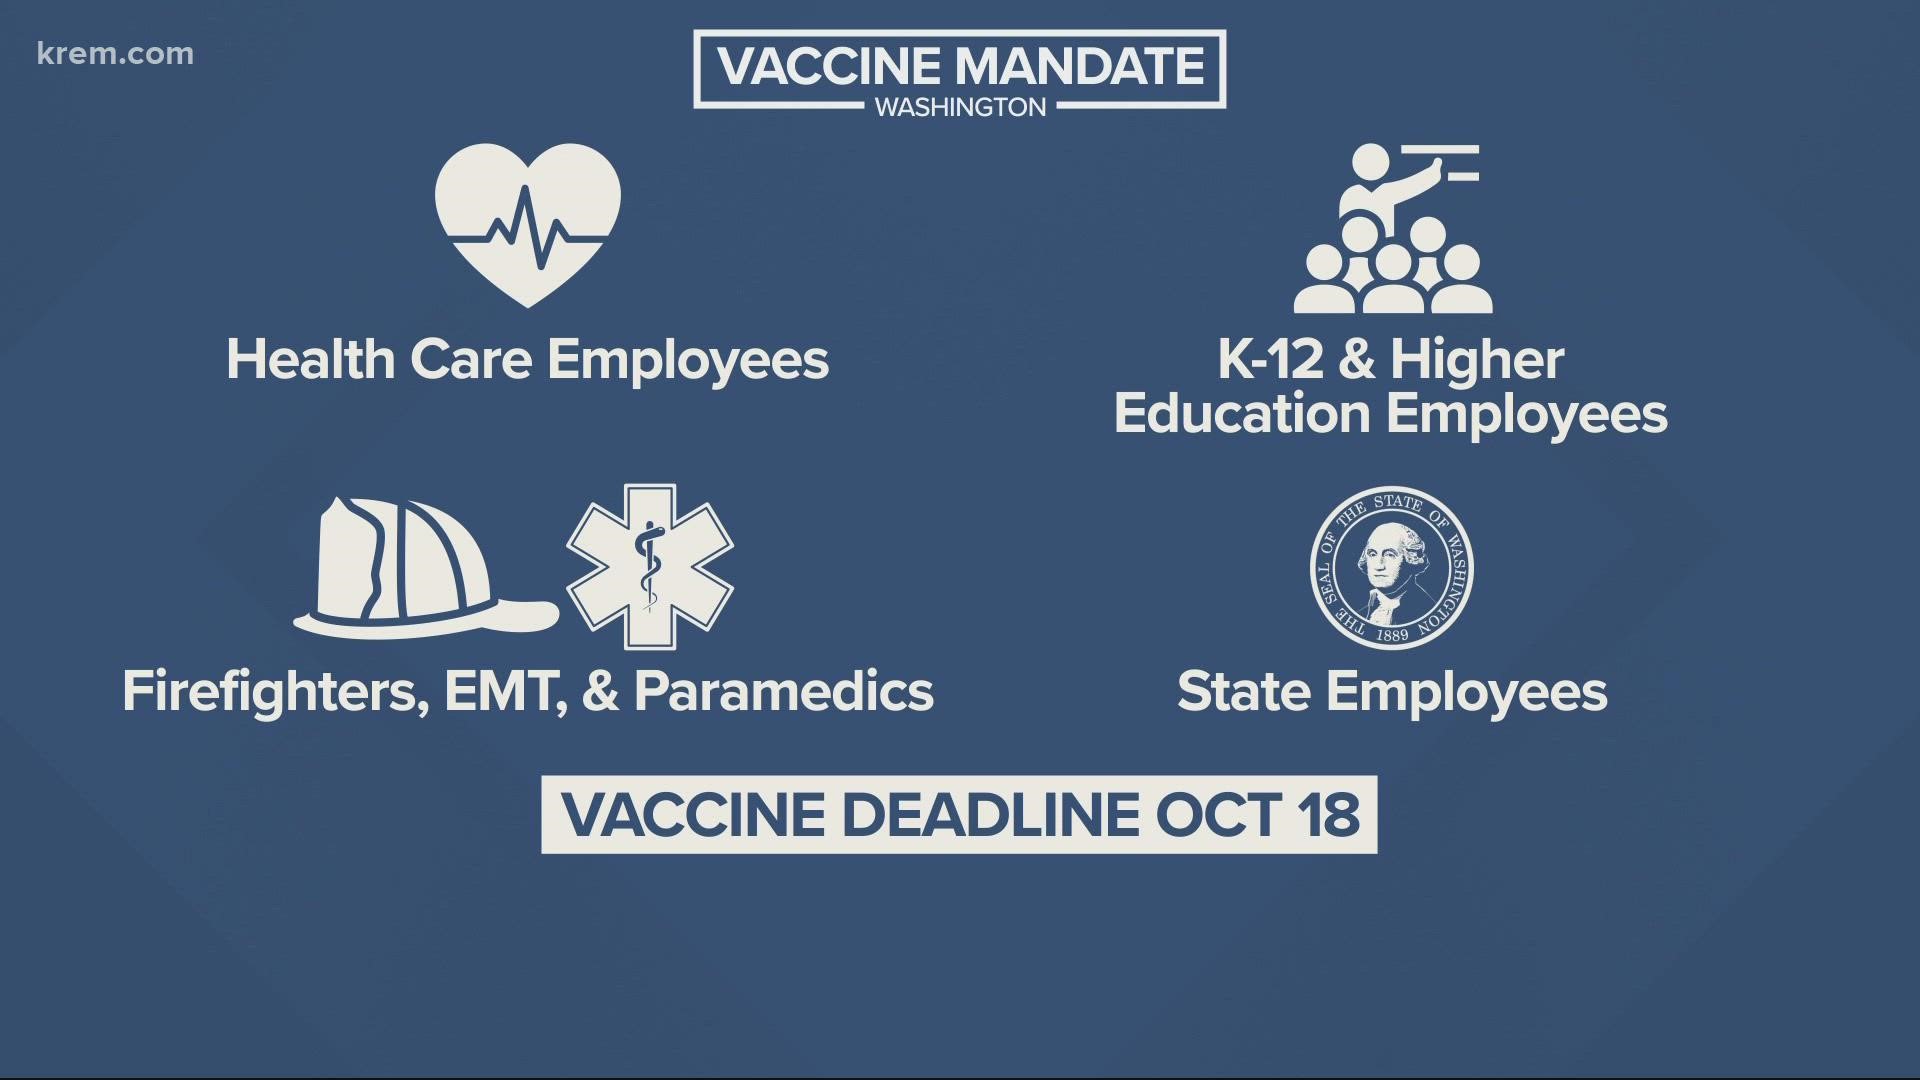 The deadline for the mandate is Oct. 18, 2021.